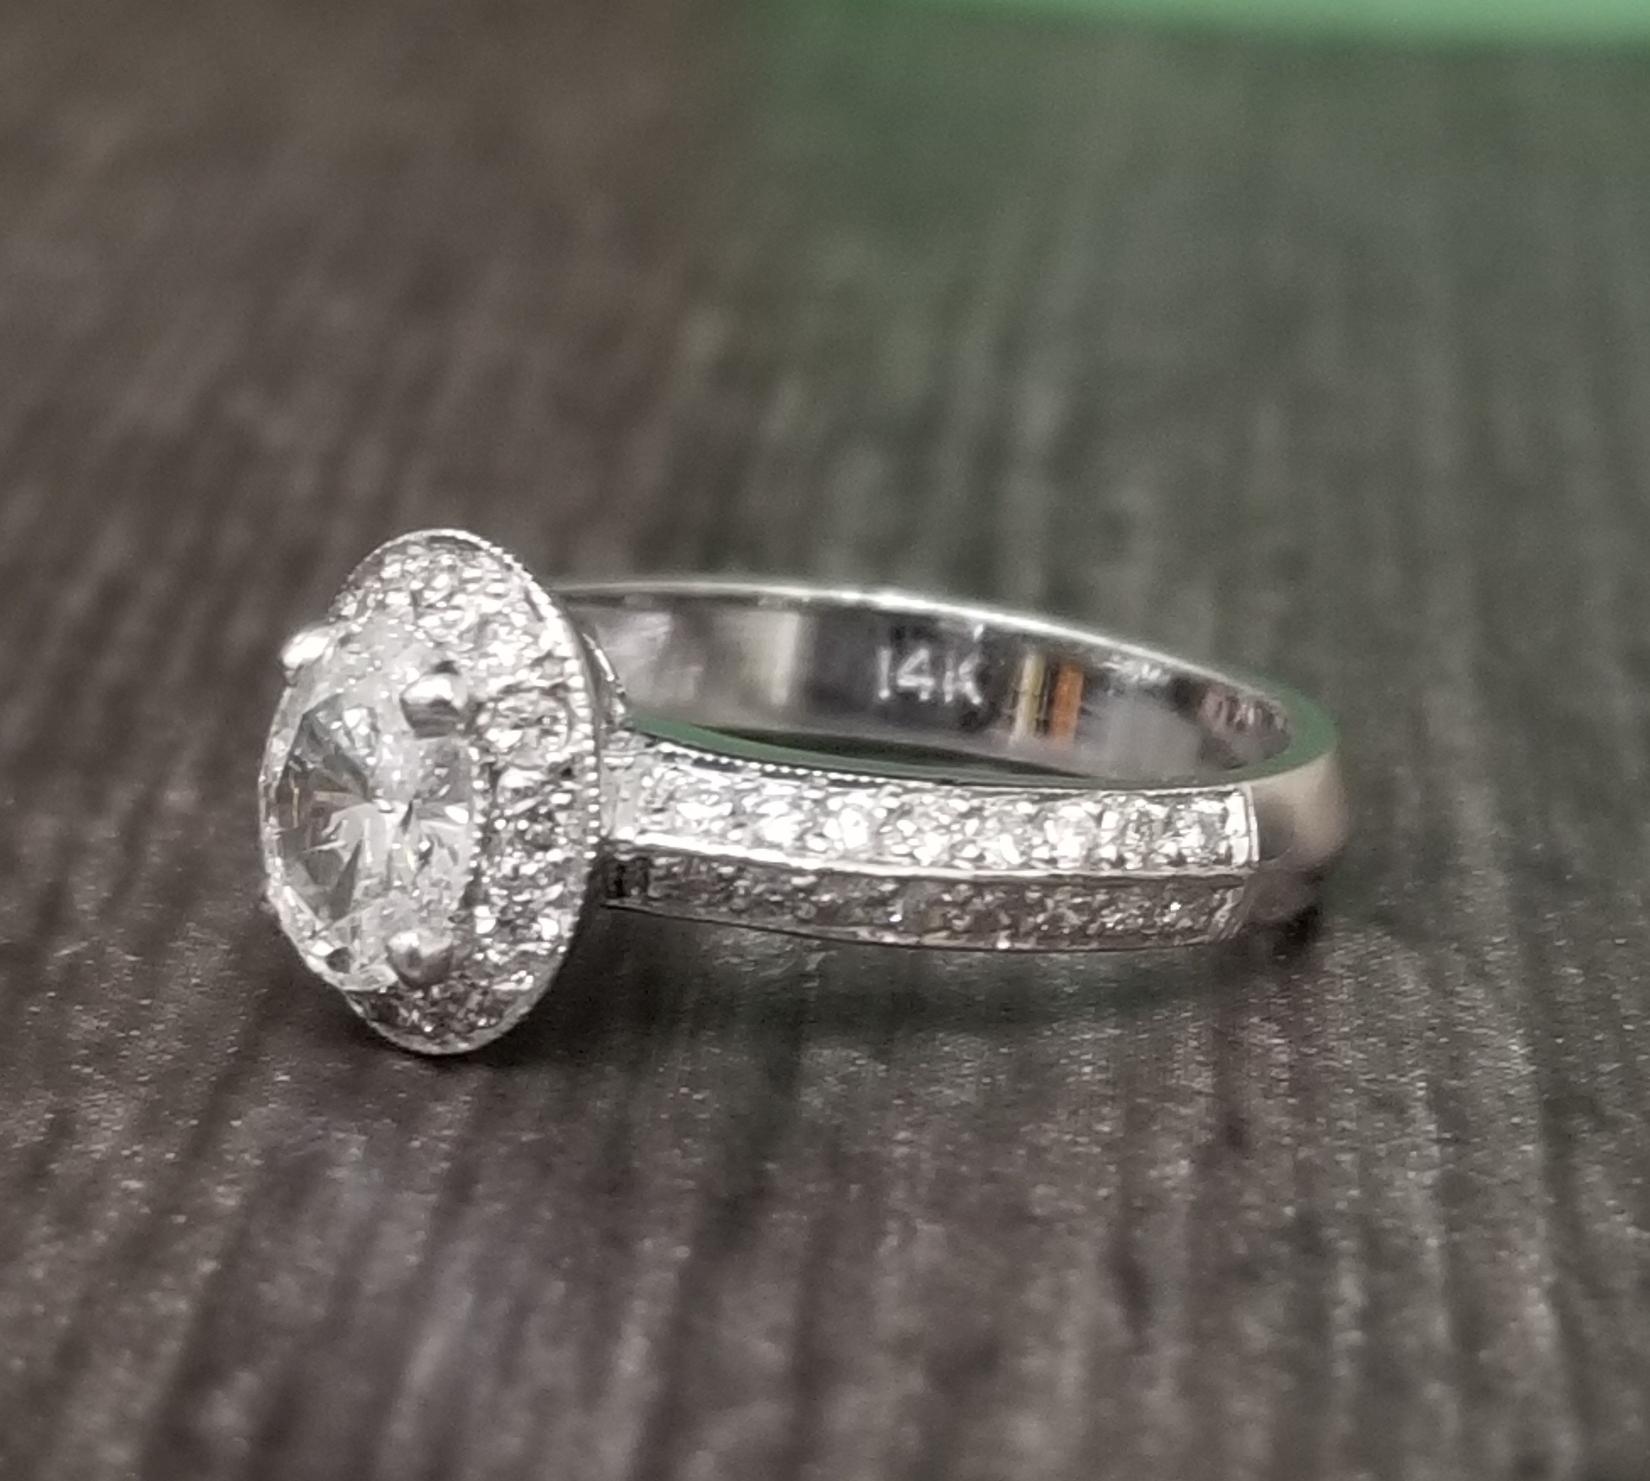 14k white gold ladies diamond ring containing 1 oval cut diamond weighing .60pts and 44 round full cut diamonds of very fine quality weighing .50pts. on a 2 row beveled shank.